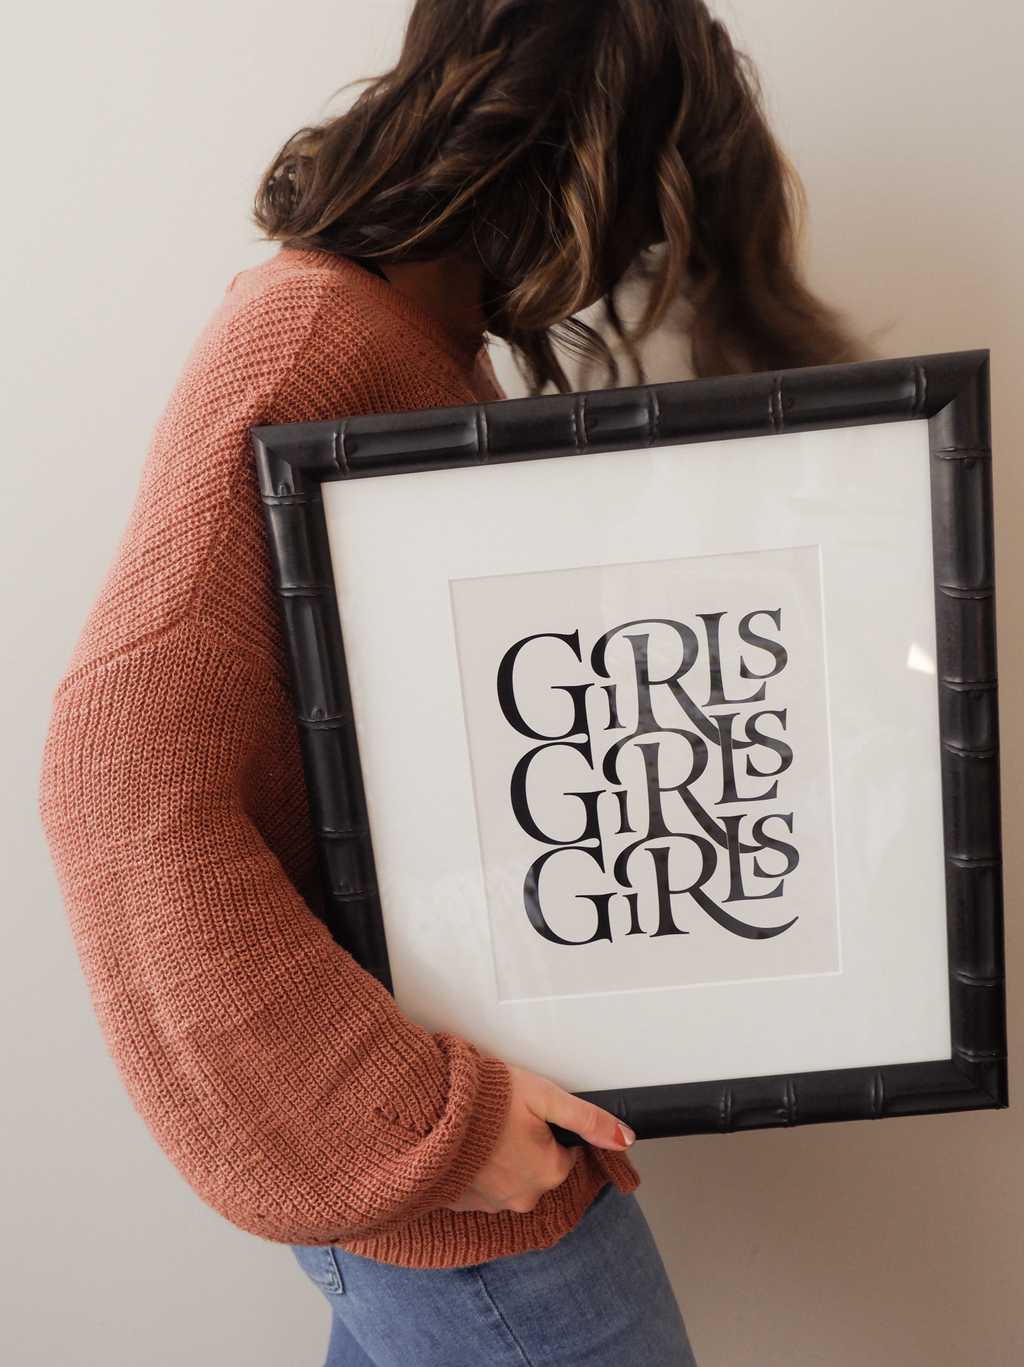 Girls Girls Girls fine art print One and Only Paper